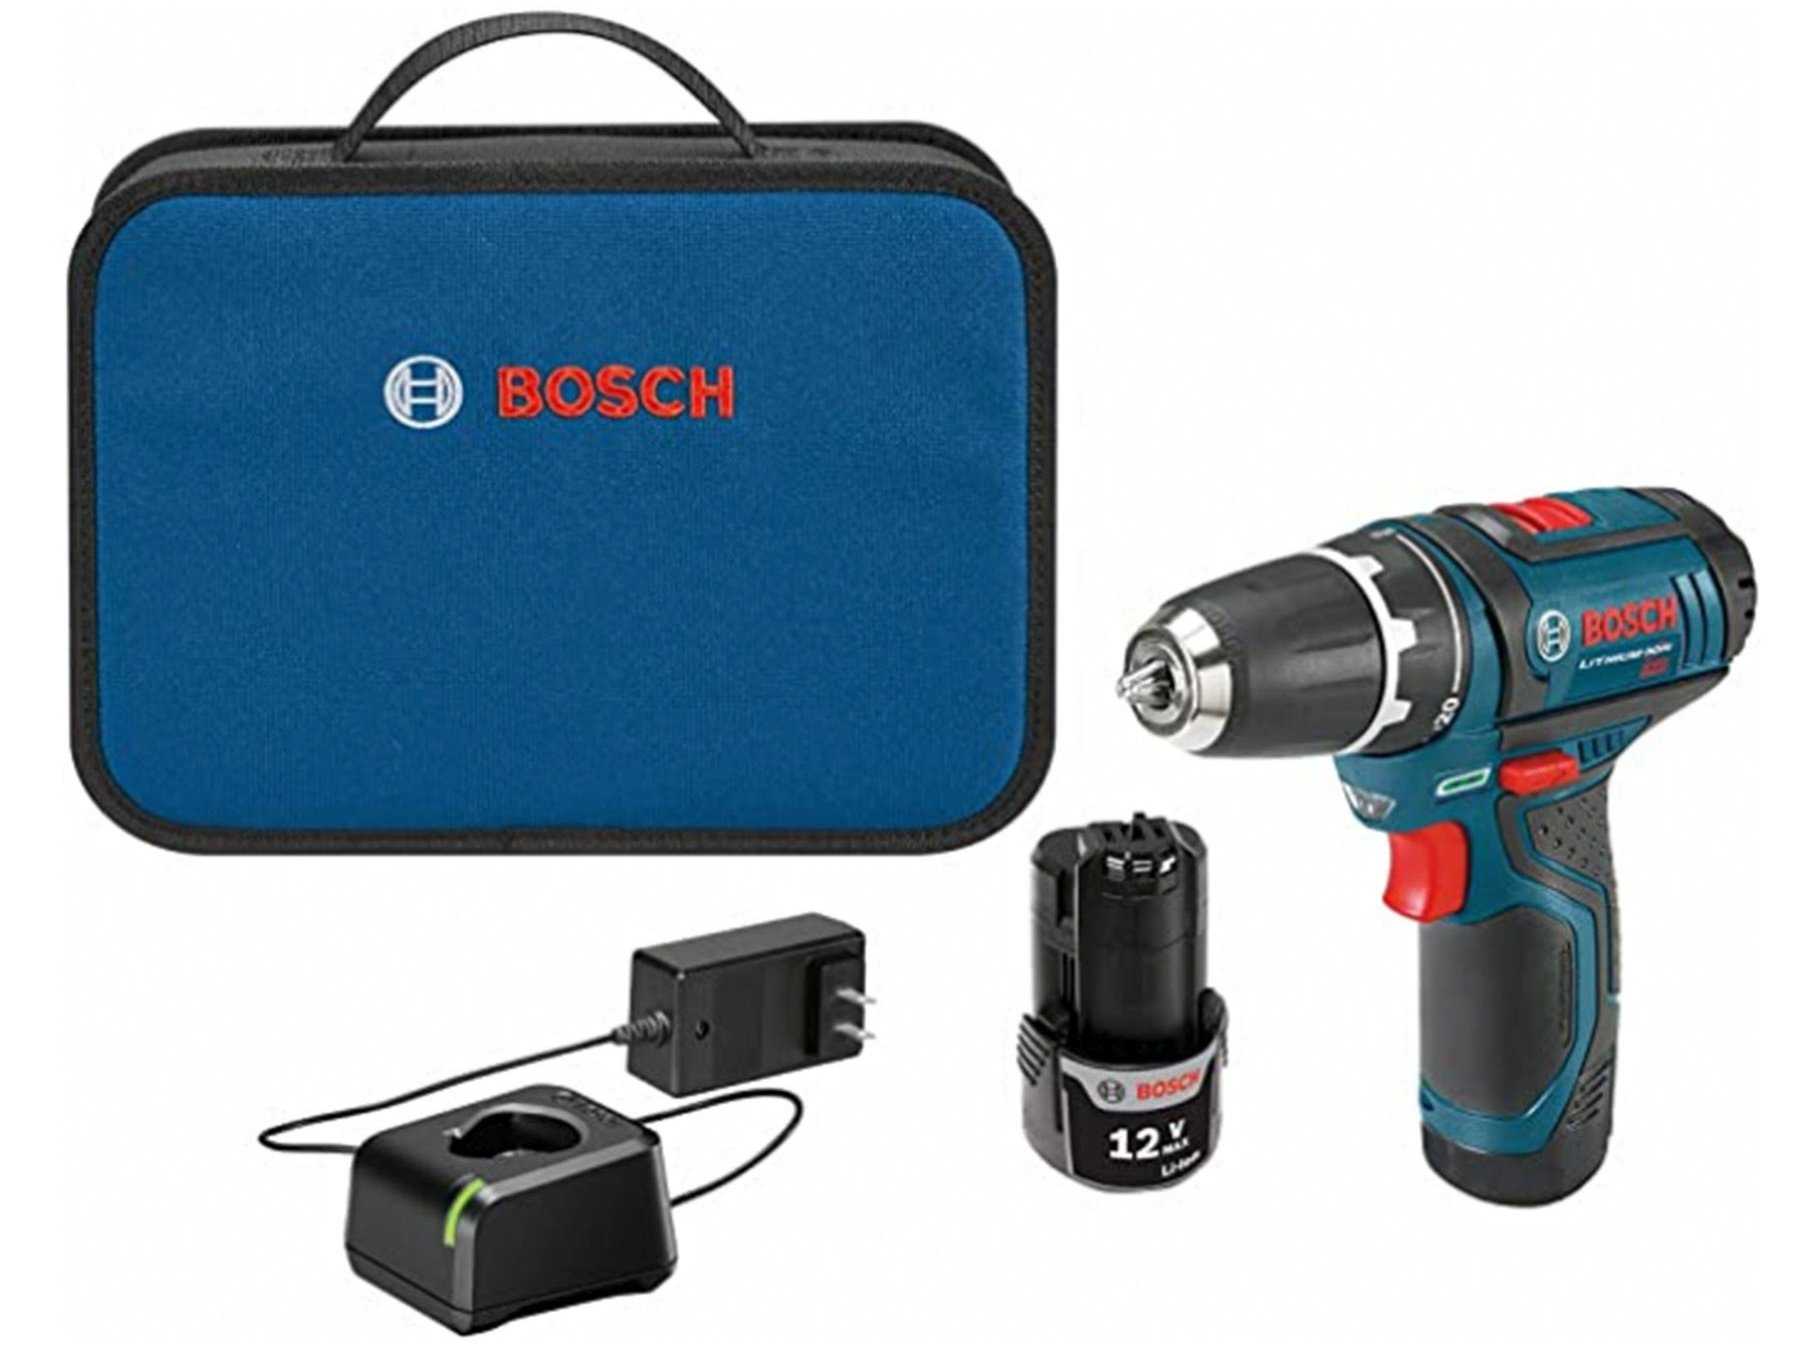 Bosch CLPK22-120-RT 12V Lithium-Ion 3/8 in. Drill Driver and Impact Driver Combo Kit 